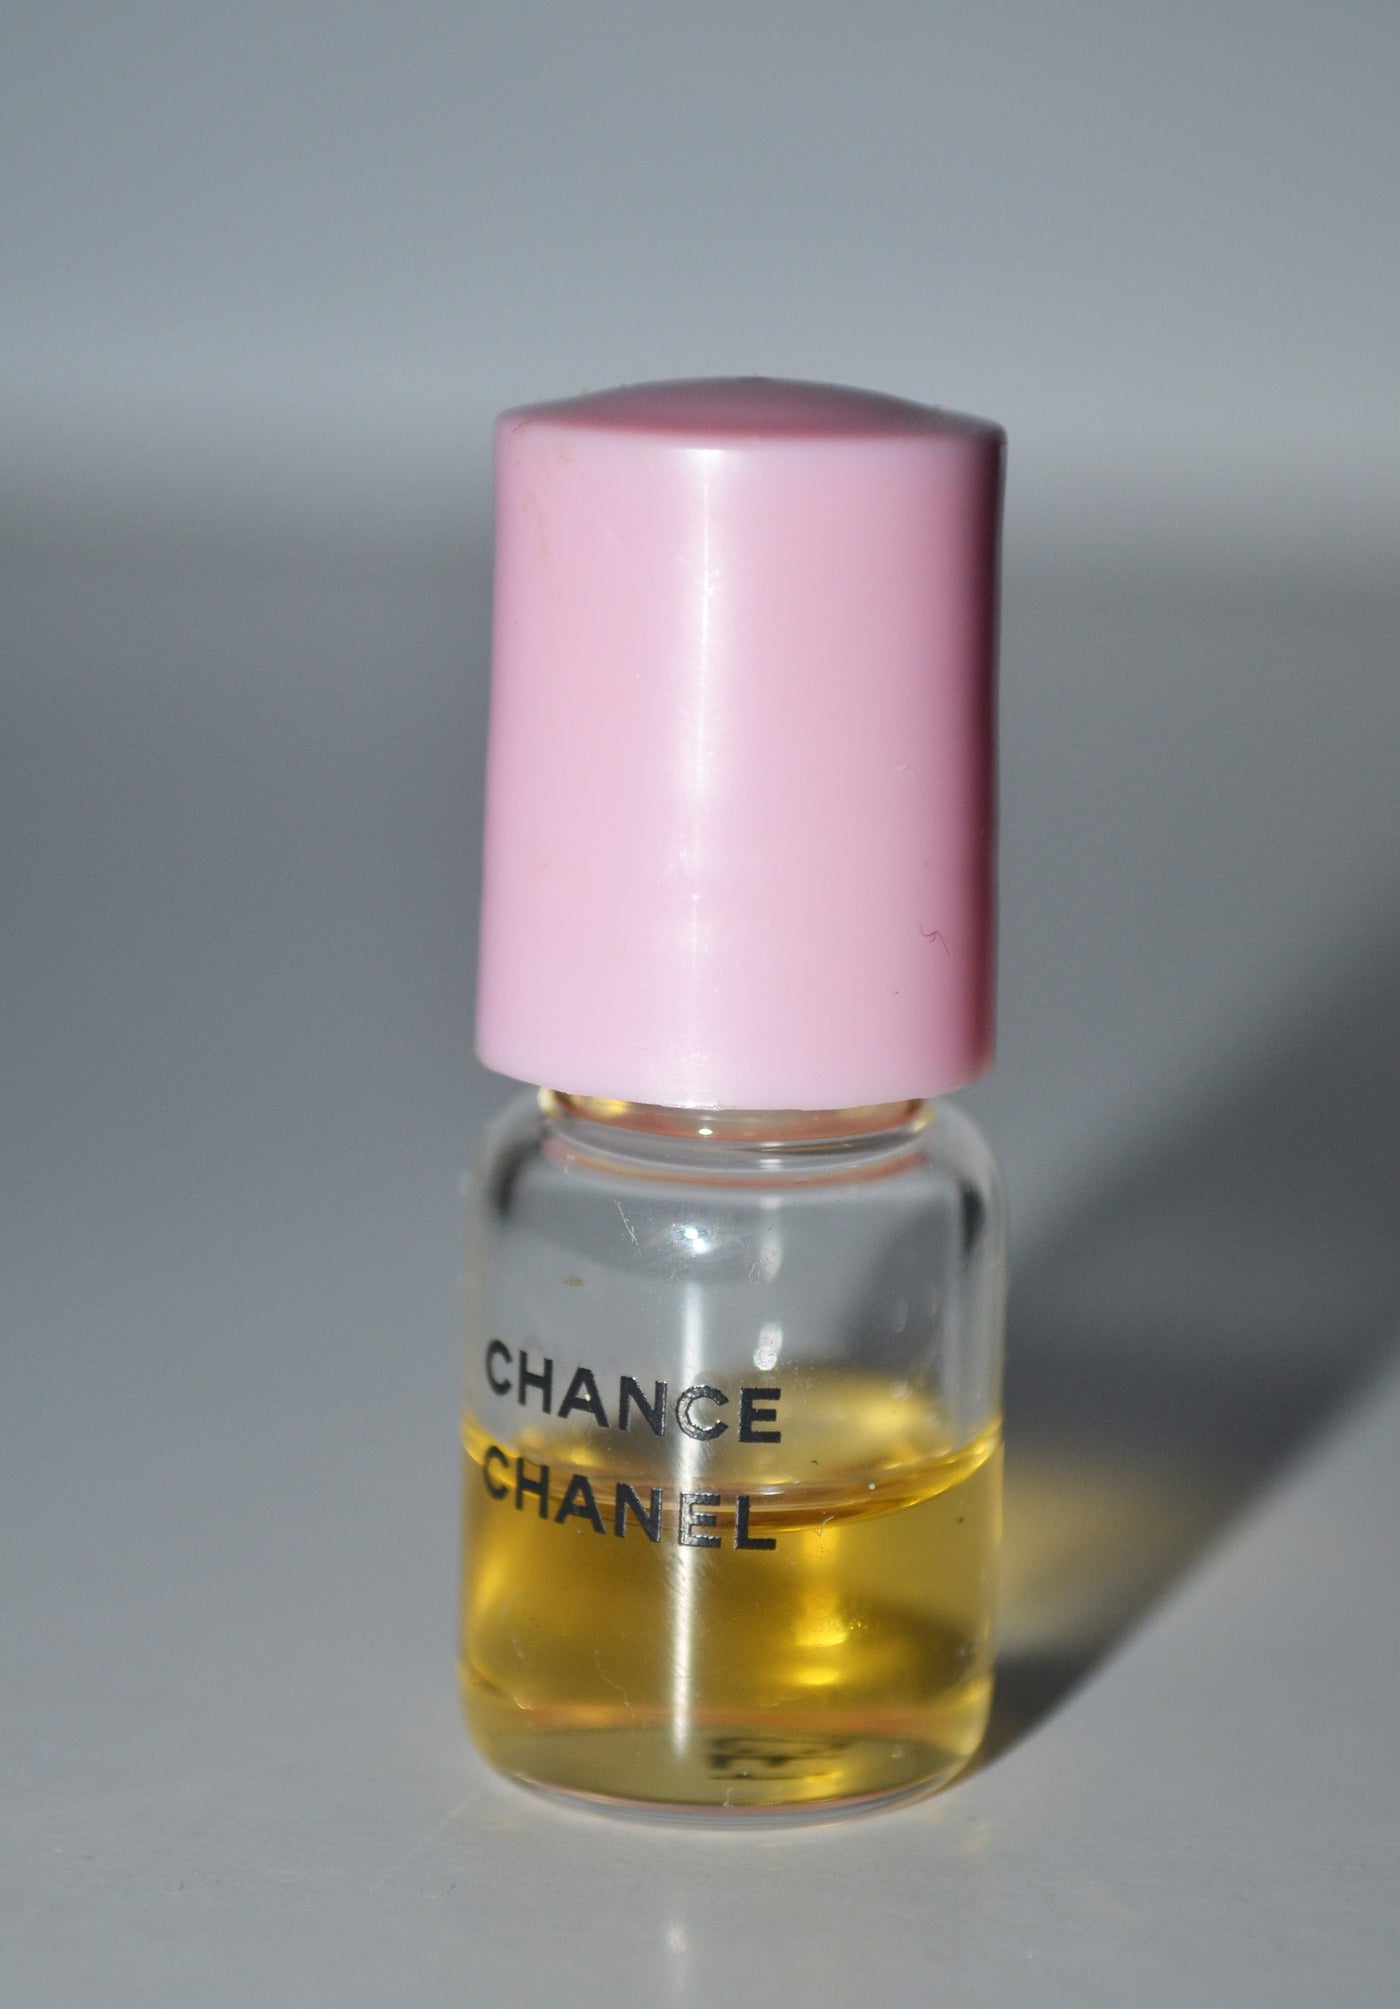 Chanel Chance Perfume Mini – Quirky Finds